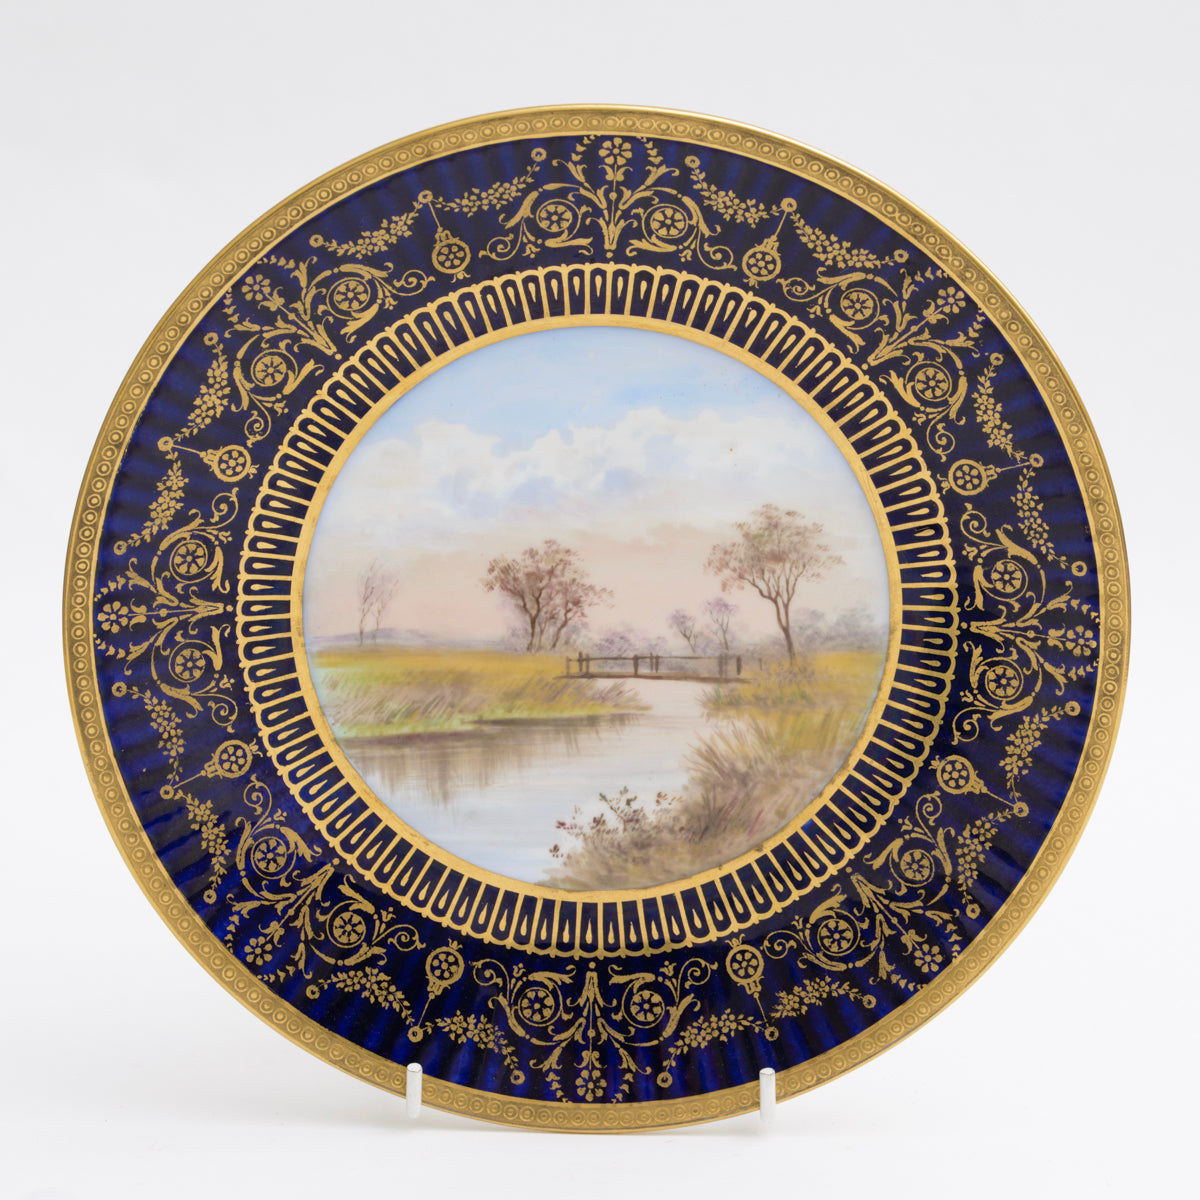 Antique Wedgwood China Hand Painted Tazza With River Scene & Wooden Bridge A/F (3138)